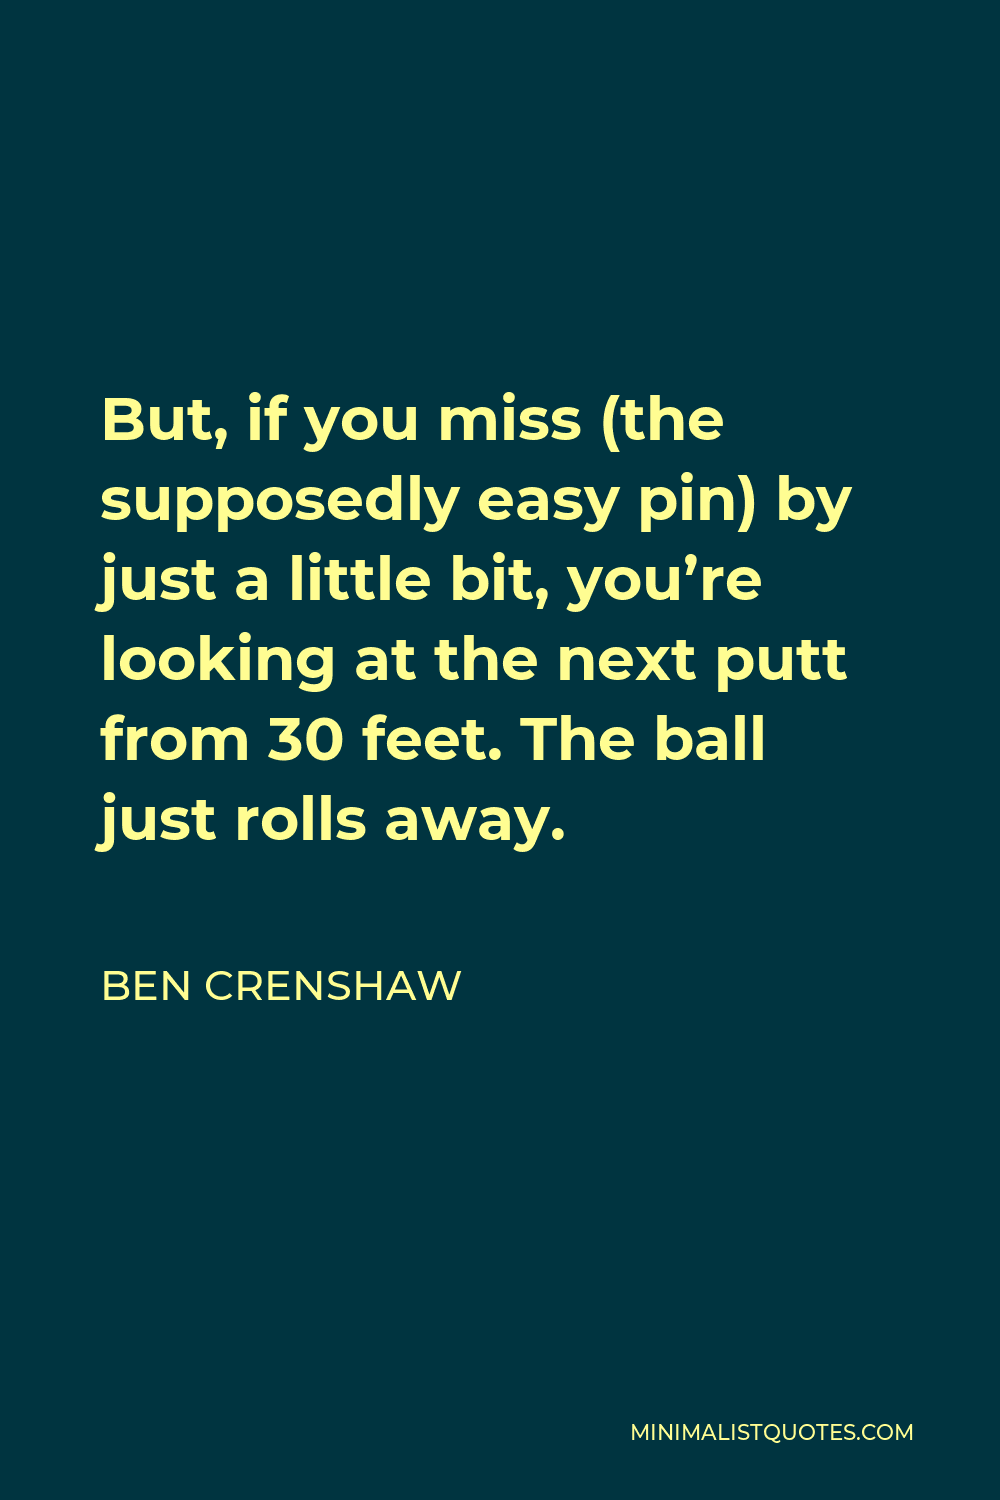 Ben Crenshaw Quote - But, if you miss (the supposedly easy pin) by just a little bit, you’re looking at the next putt from 30 feet. The ball just rolls away.